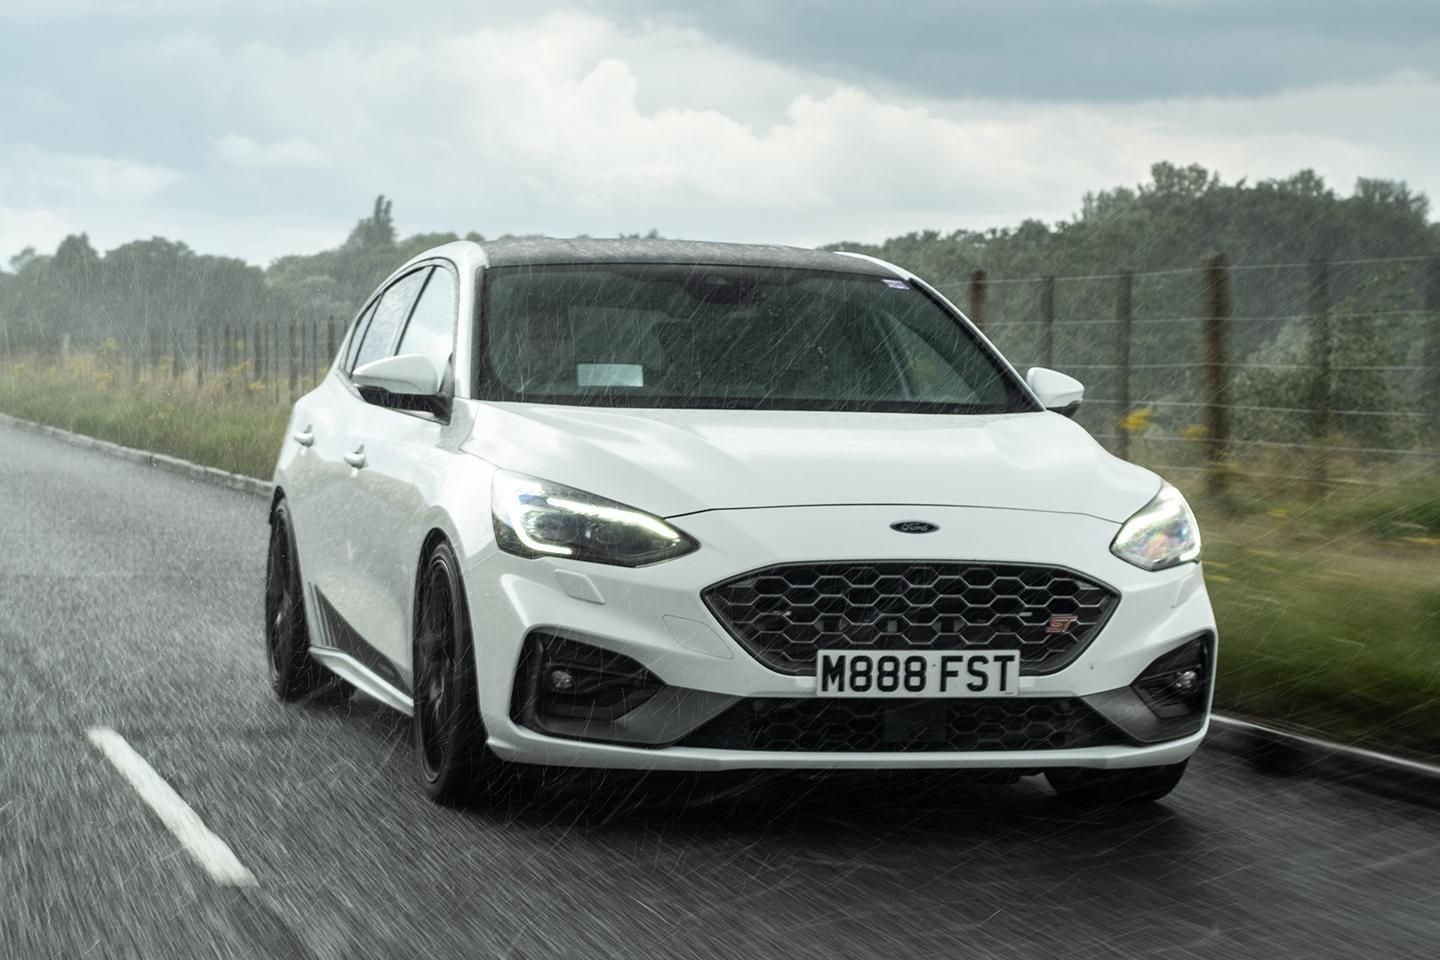 Ford Focus ST Mountune m365 review: the RS we never got? Reviews